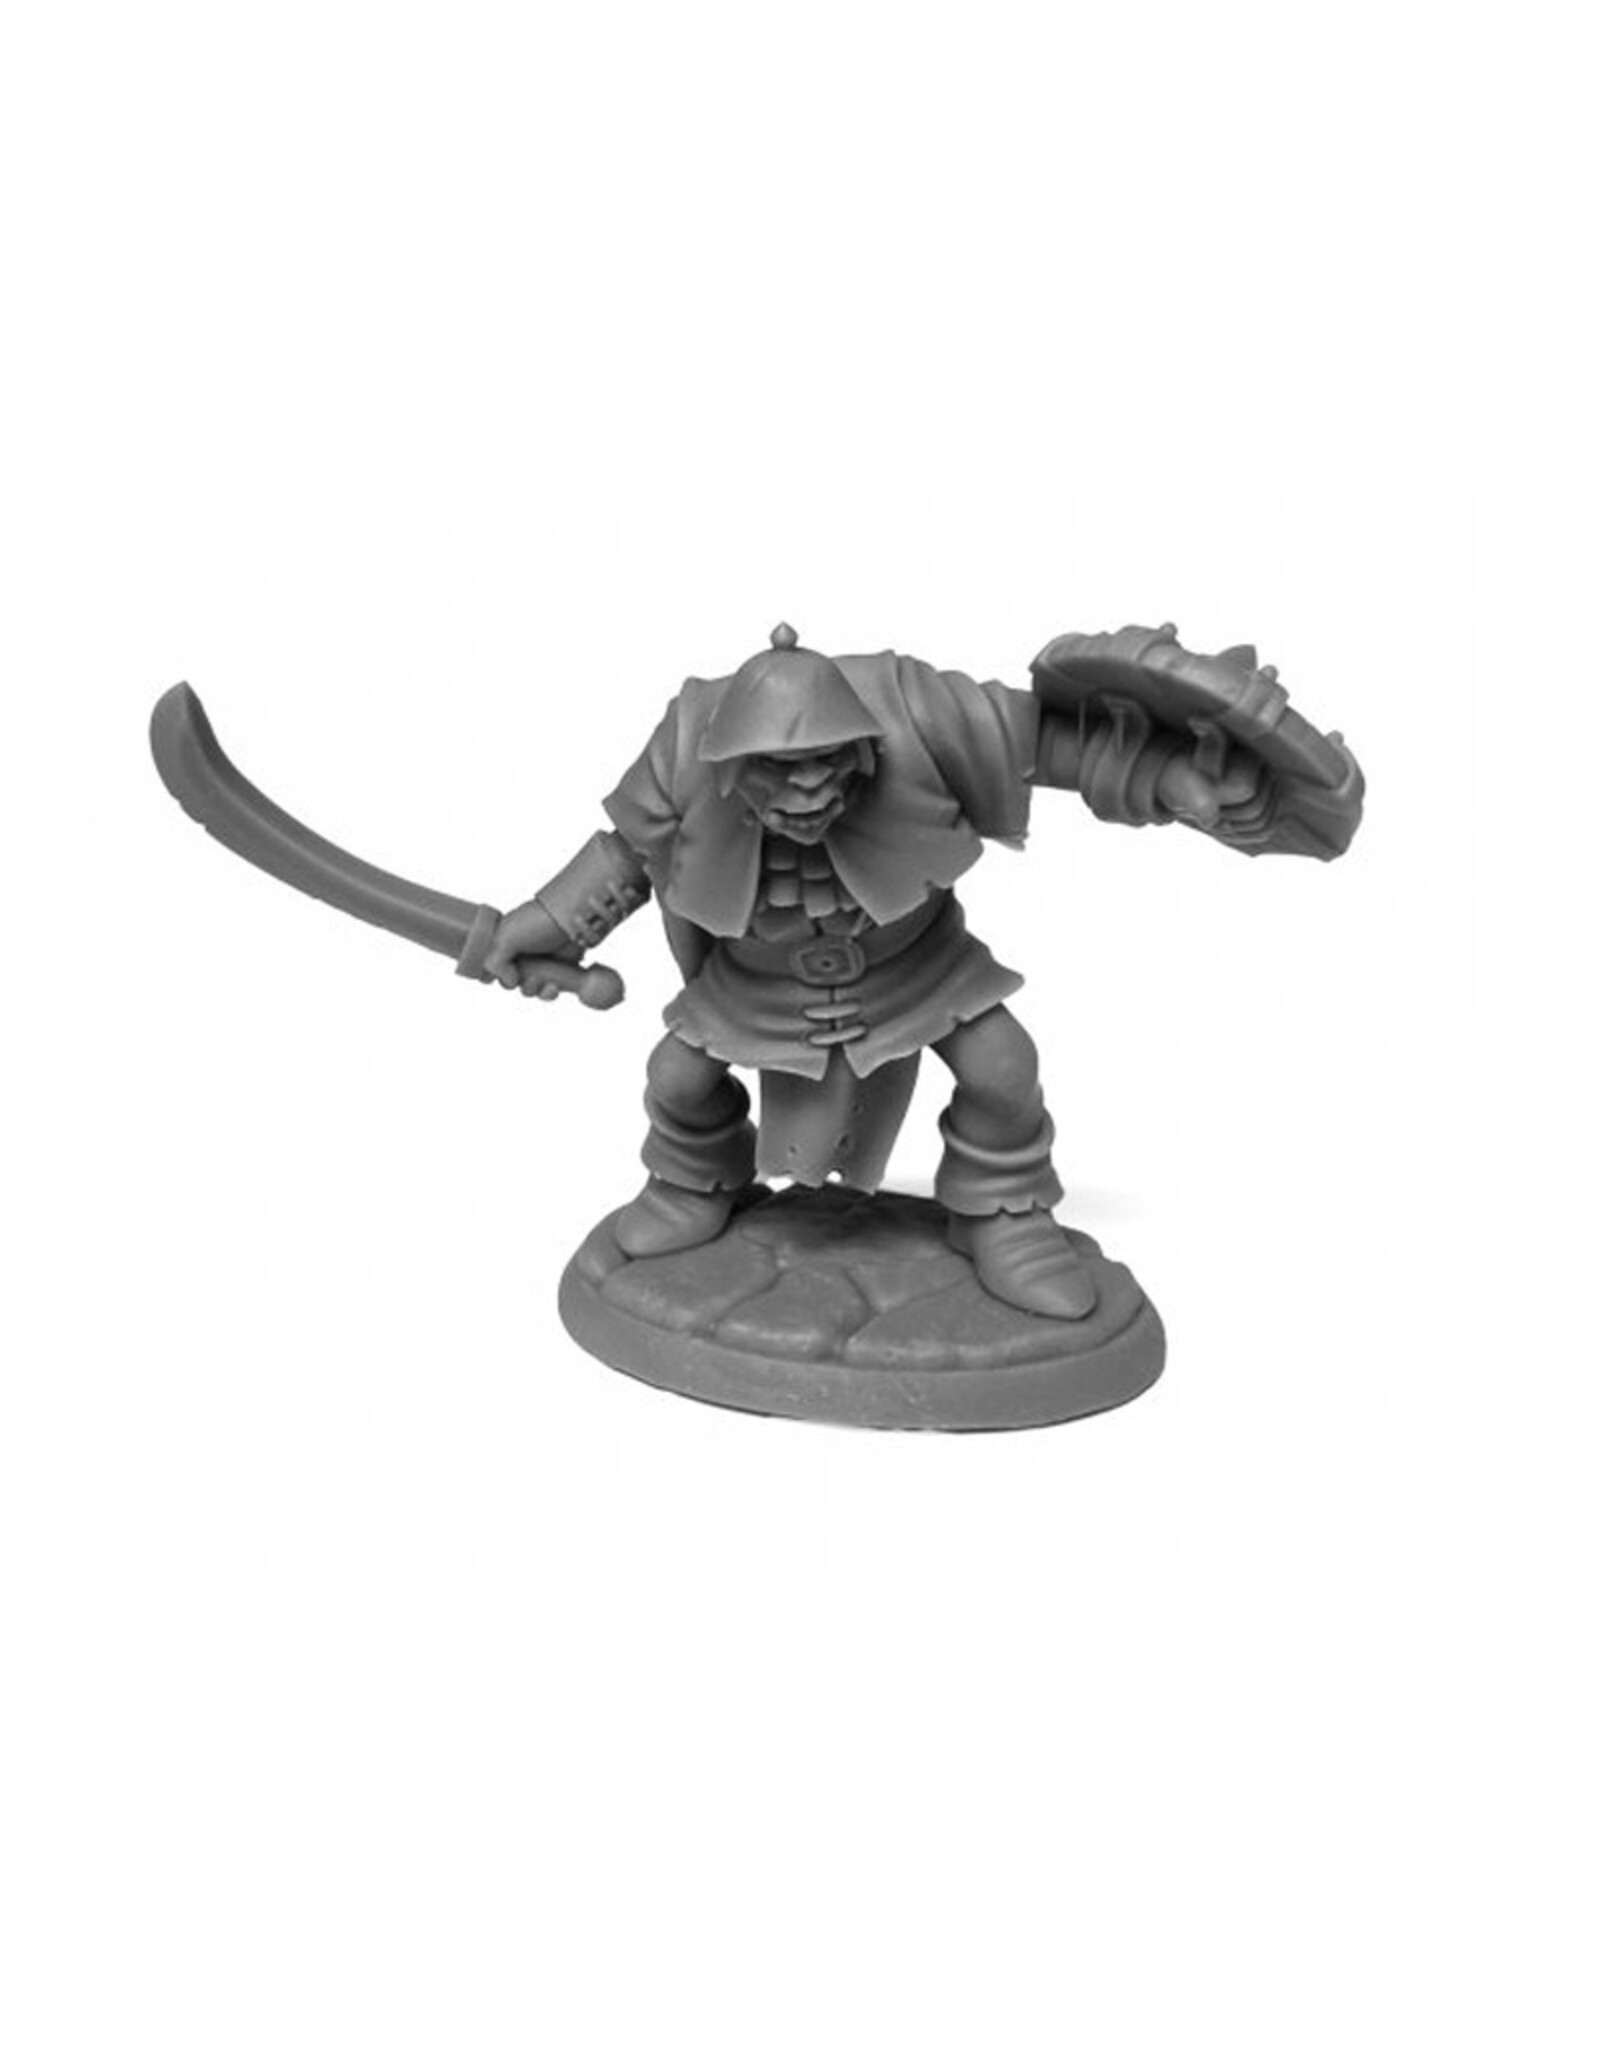 Reaper Reaper Minis: Grushnal Ragged Wound Orc #07093